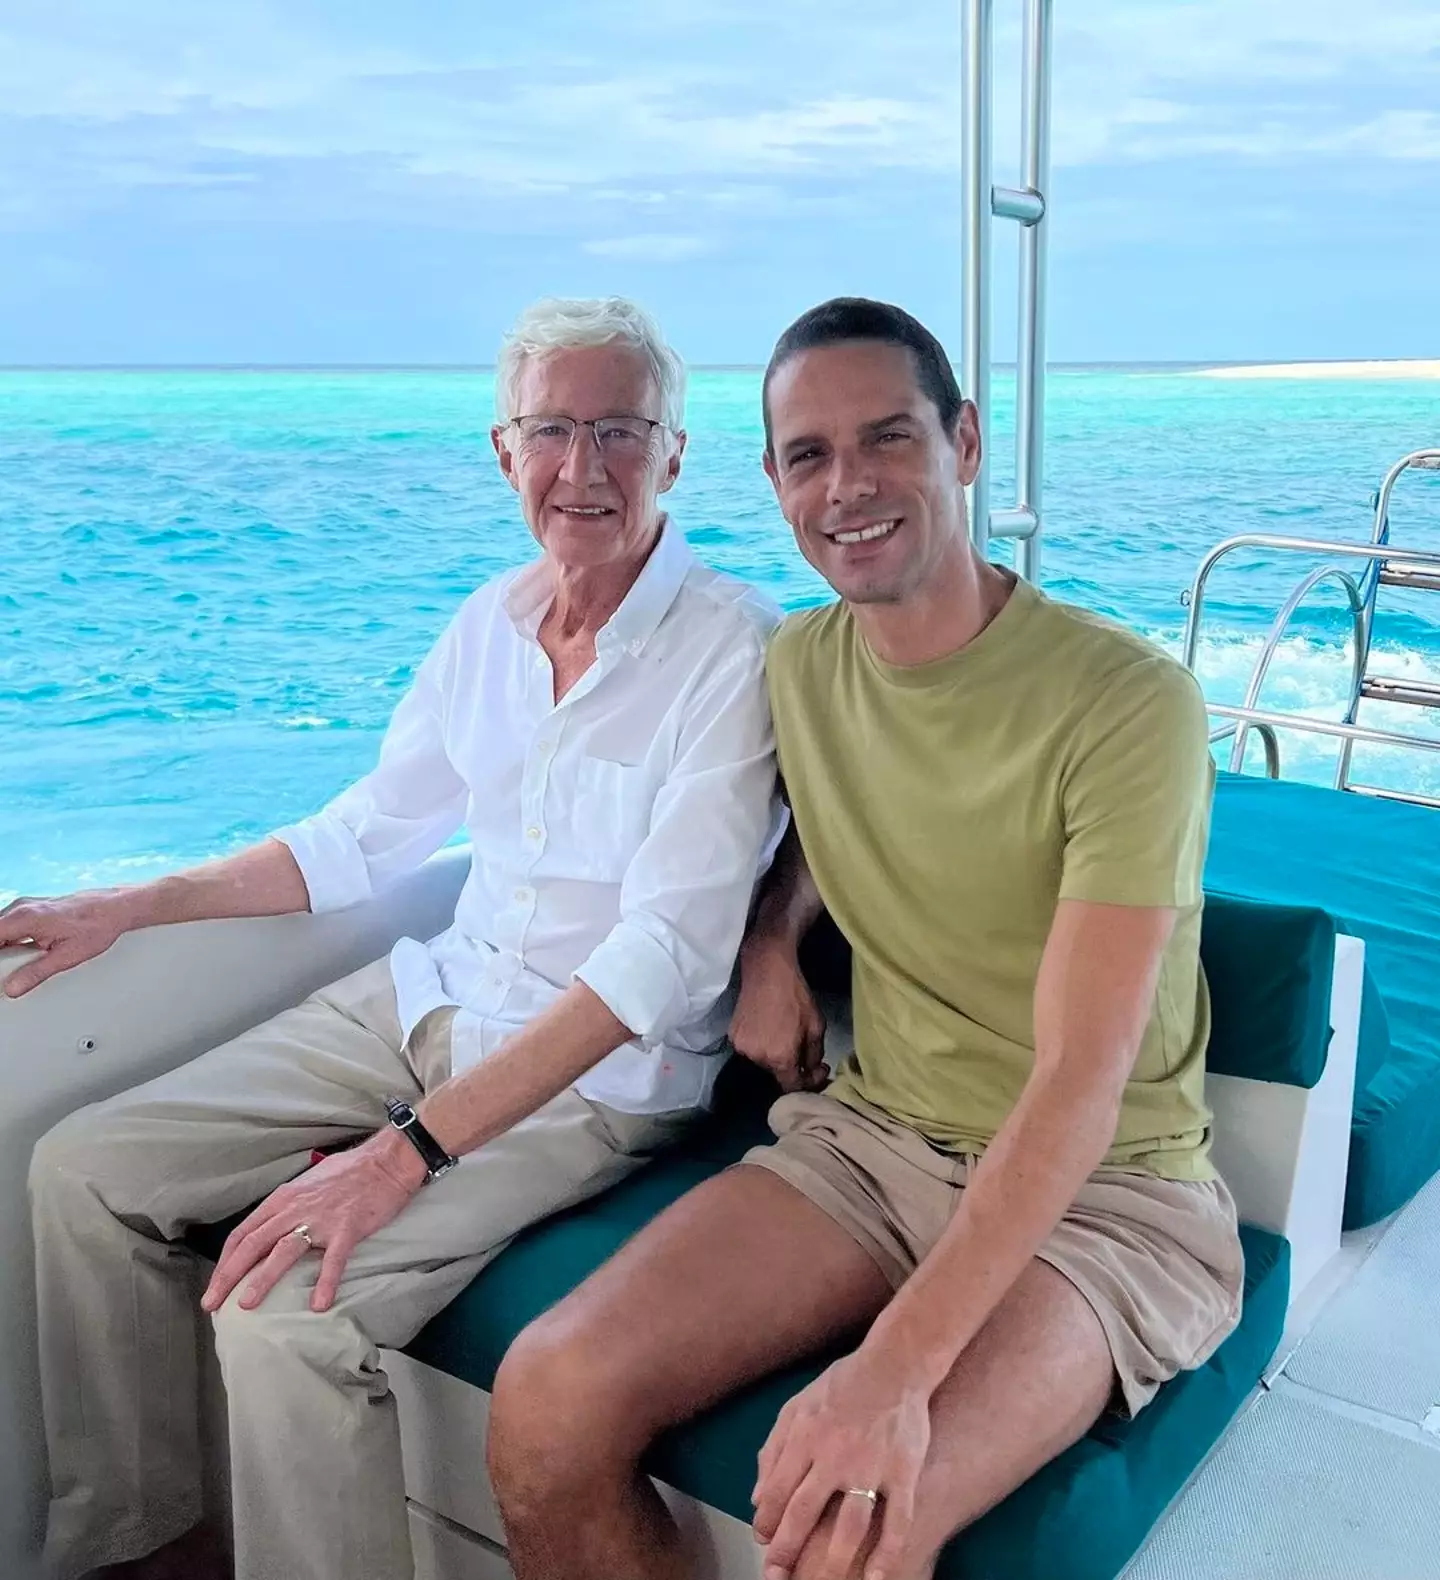 Andre Portasio and Paul O'Grady's last picture together.